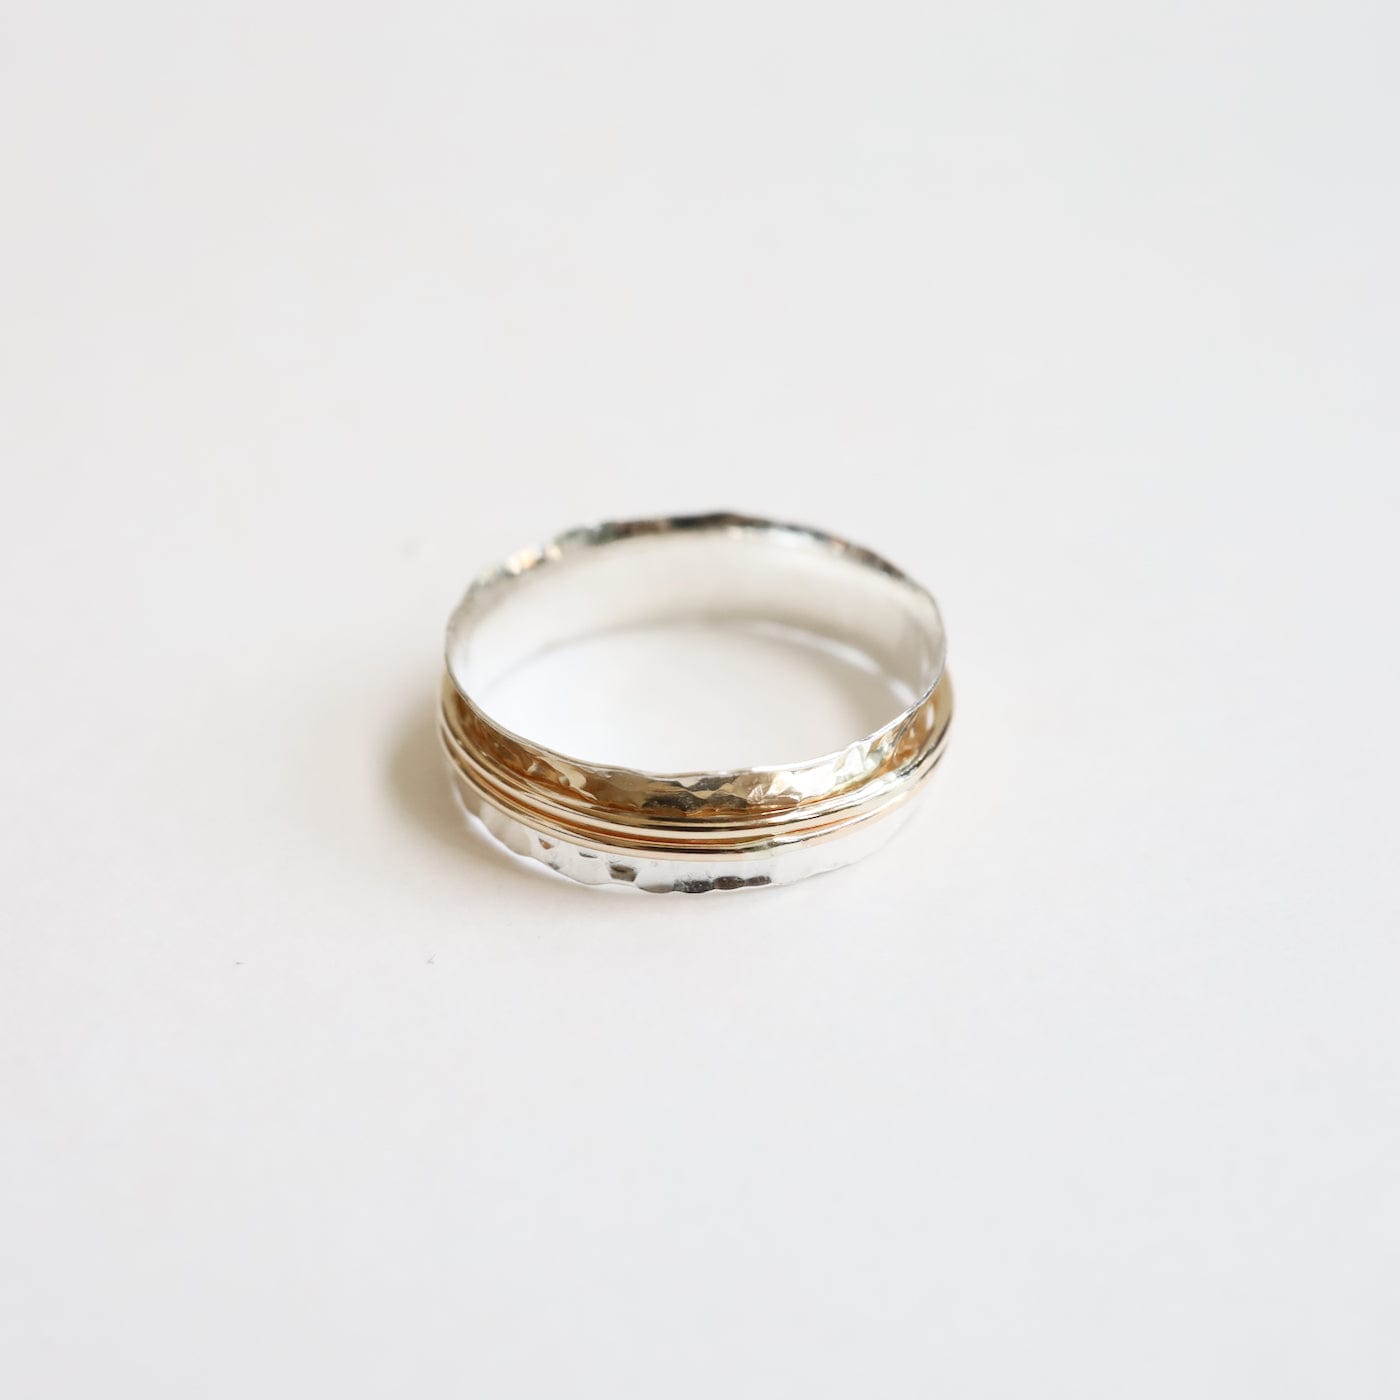 RNG-GF Hammered Sterling Silver Ring with Gold Filled Spinning Bands